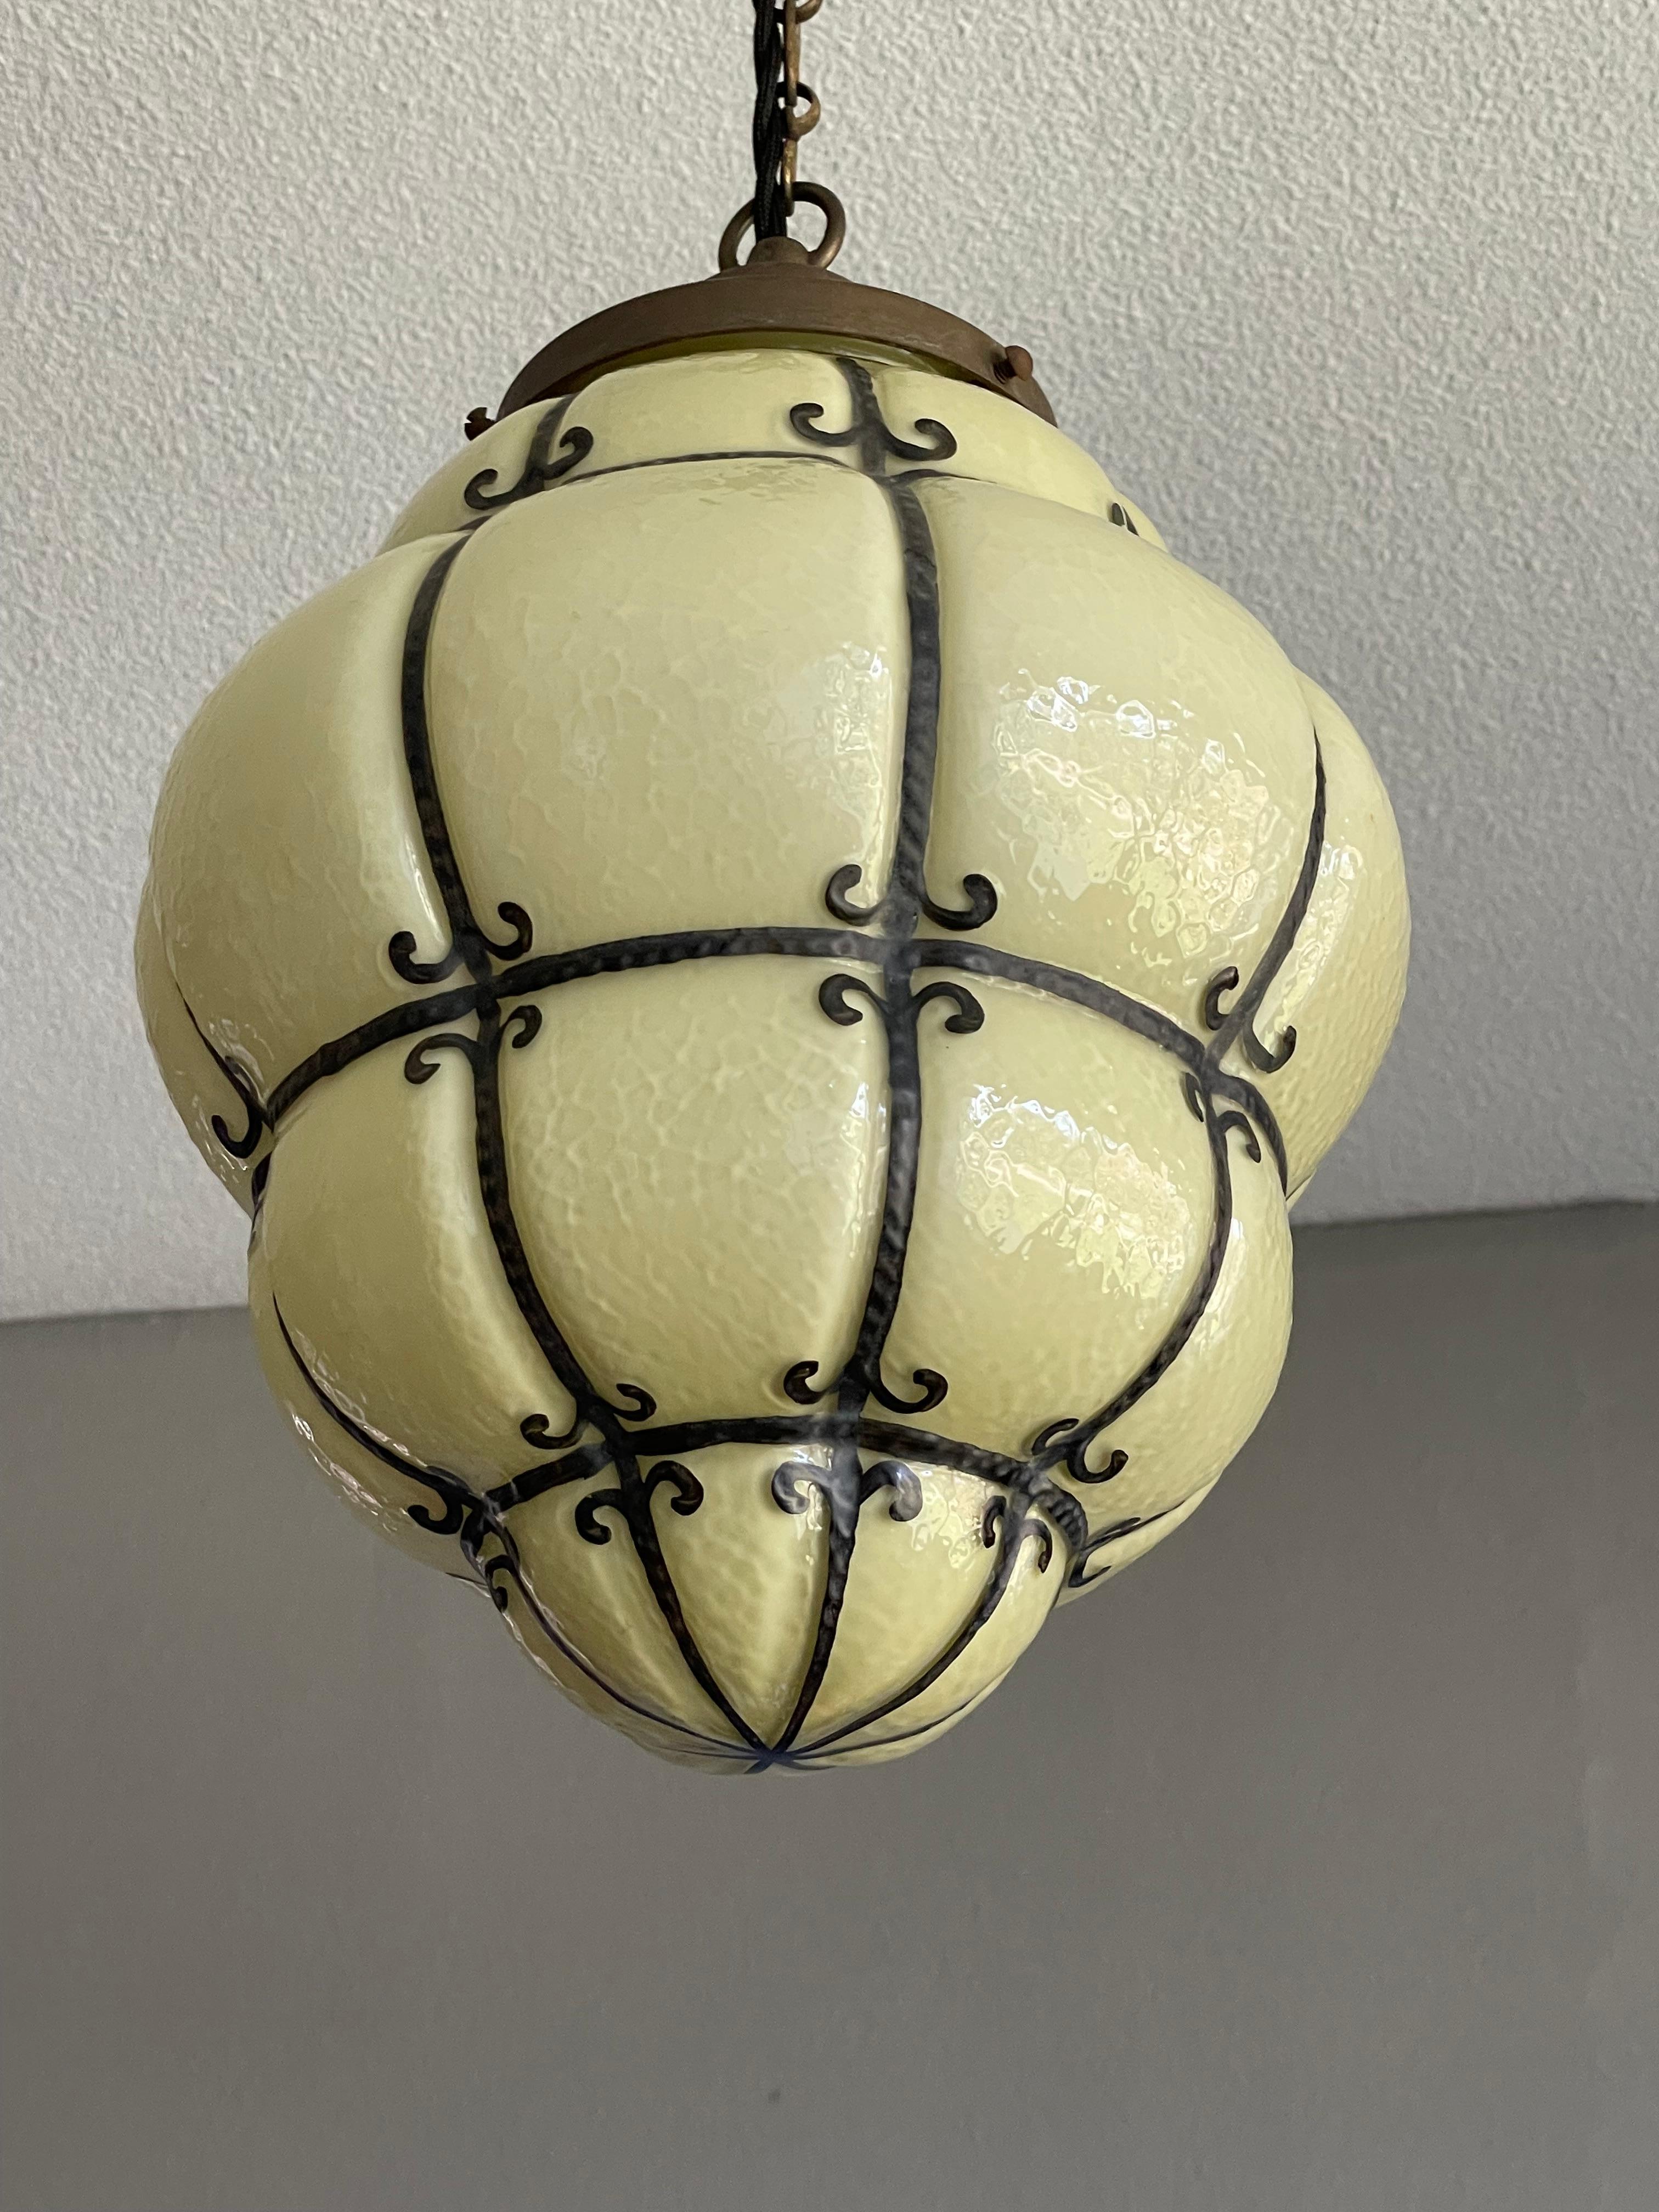 Timeless and practical size midcentury pendant, ideal for hallway, landing and bedroom.

This rare ceiling lamp from the midcentury era could be the perfect lighting solution for an entrance or any other small living space. This unique, mouthblown